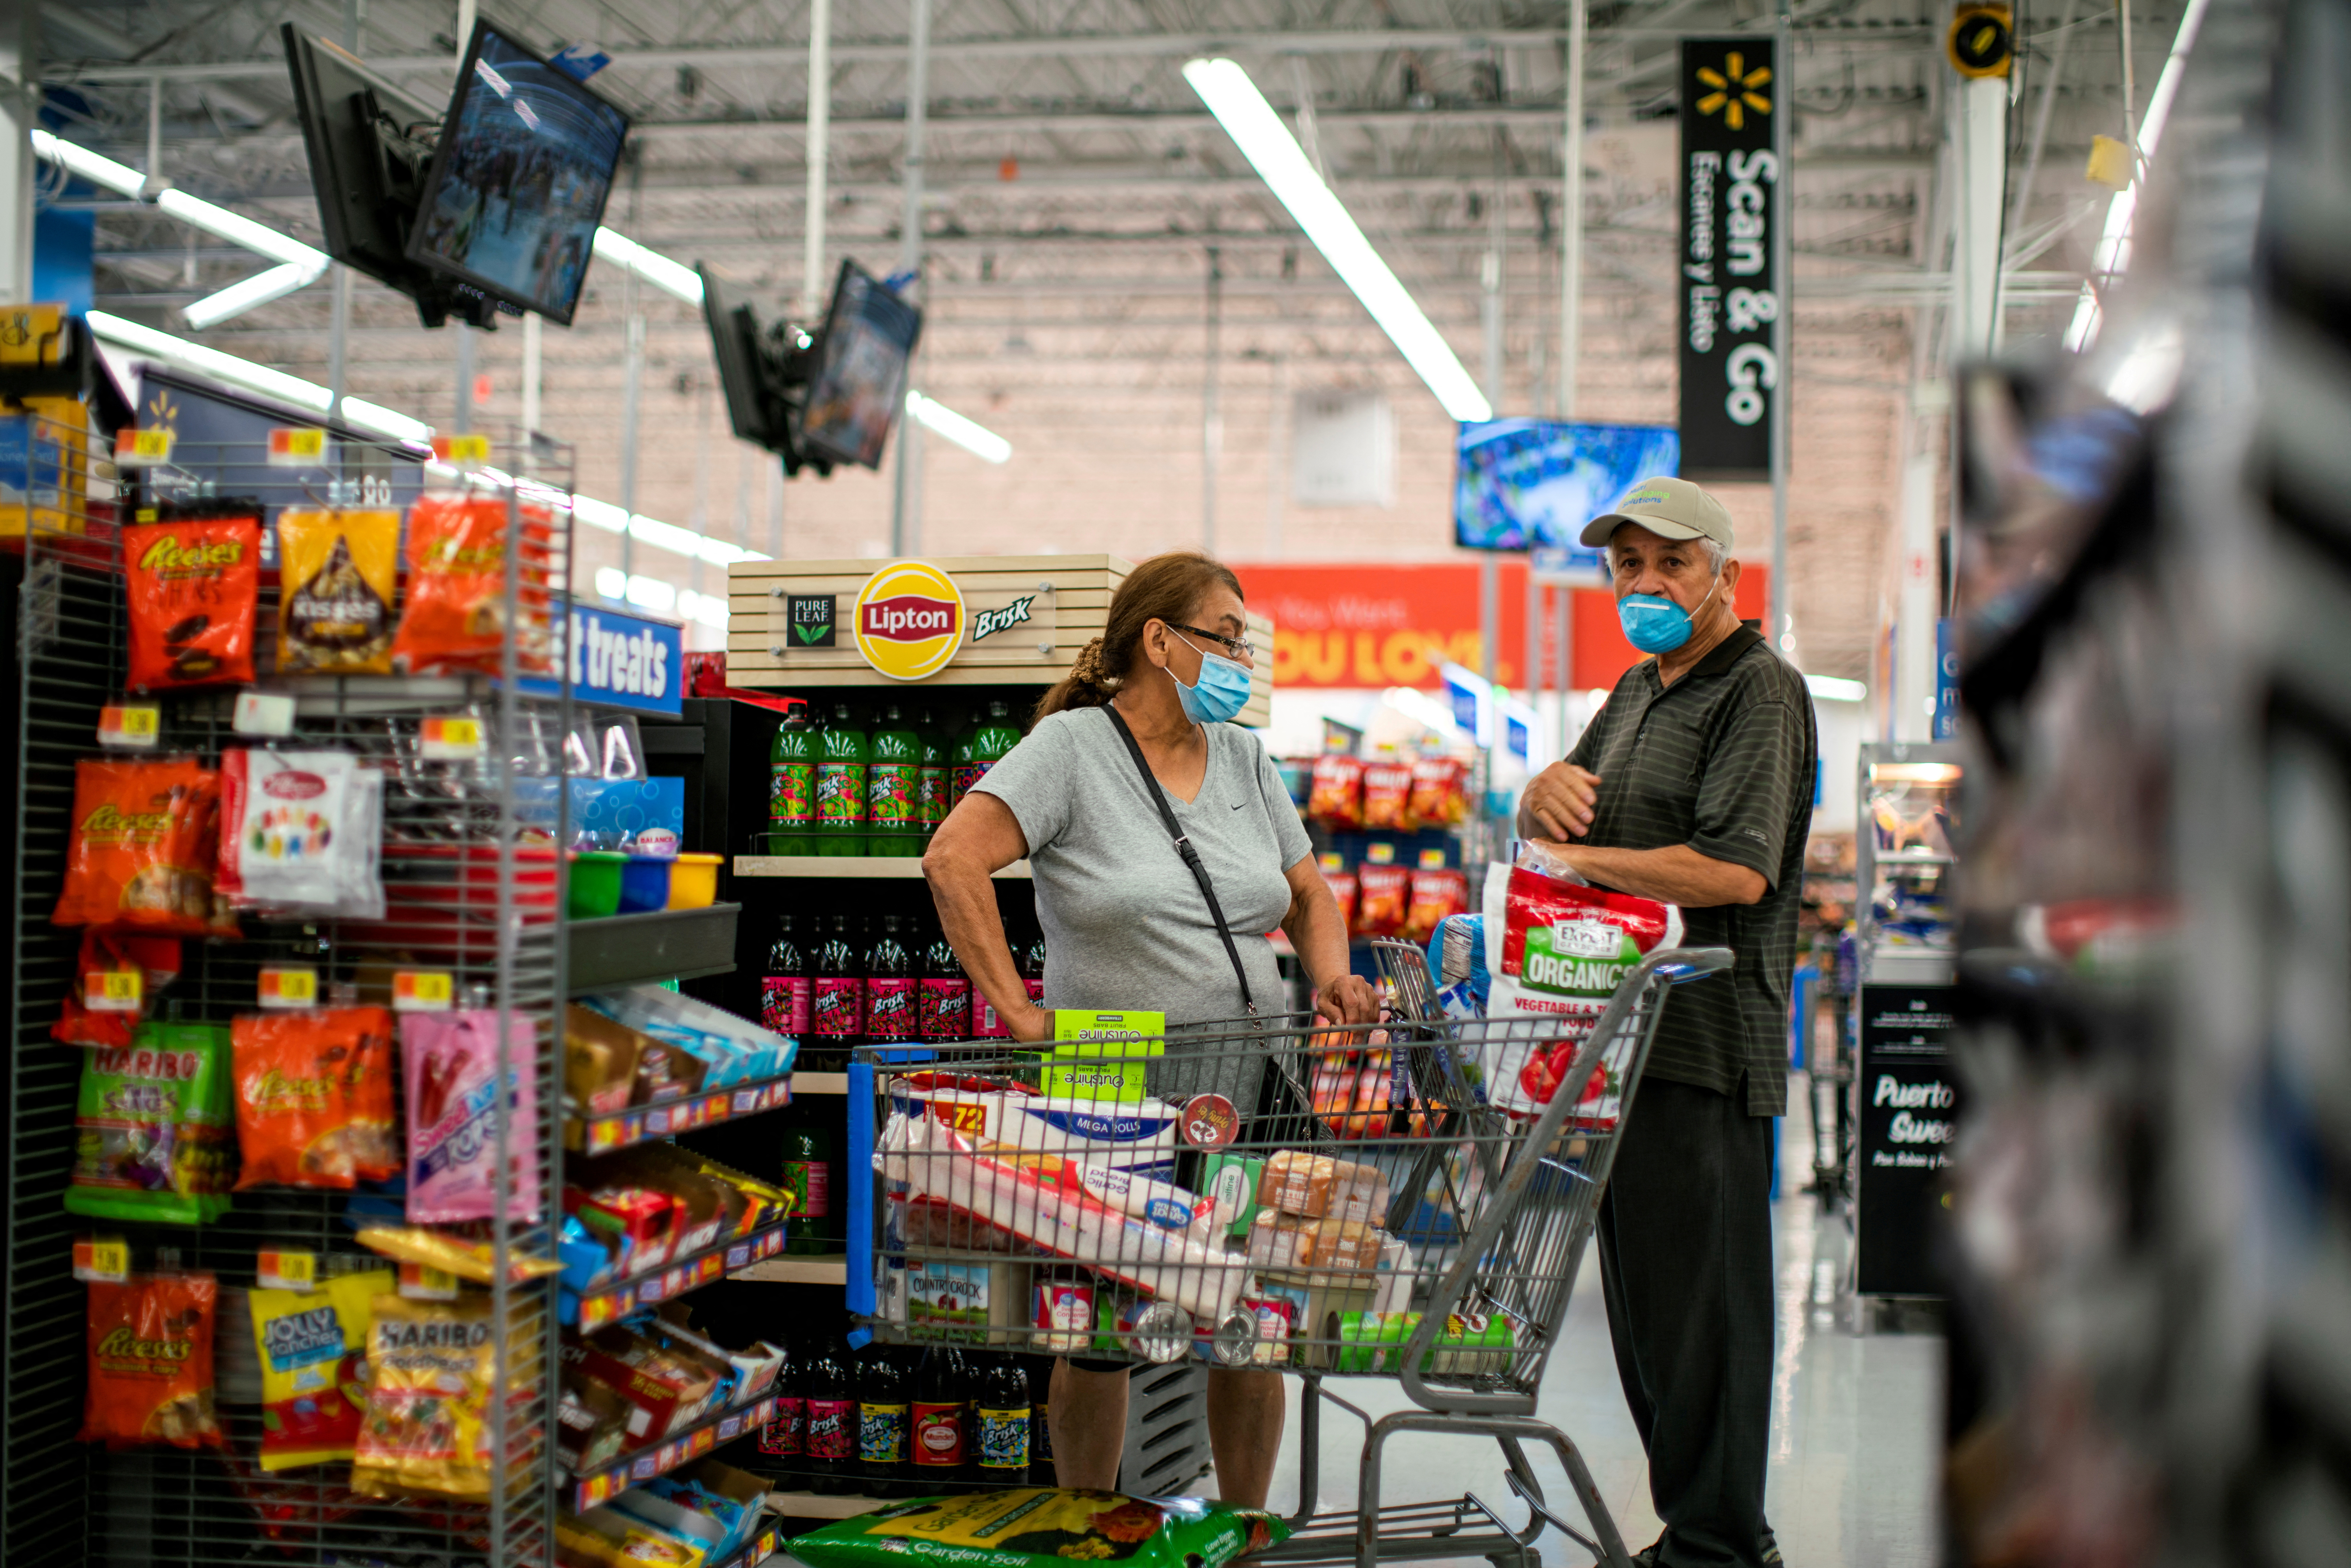 FILE PHOTO: Shoppers wear masks as they shop at a Walmart store, in North Brunswick, New Jersey, U.S., July 20, 2020. REUTERS/Eduardo Munoz/File Photo